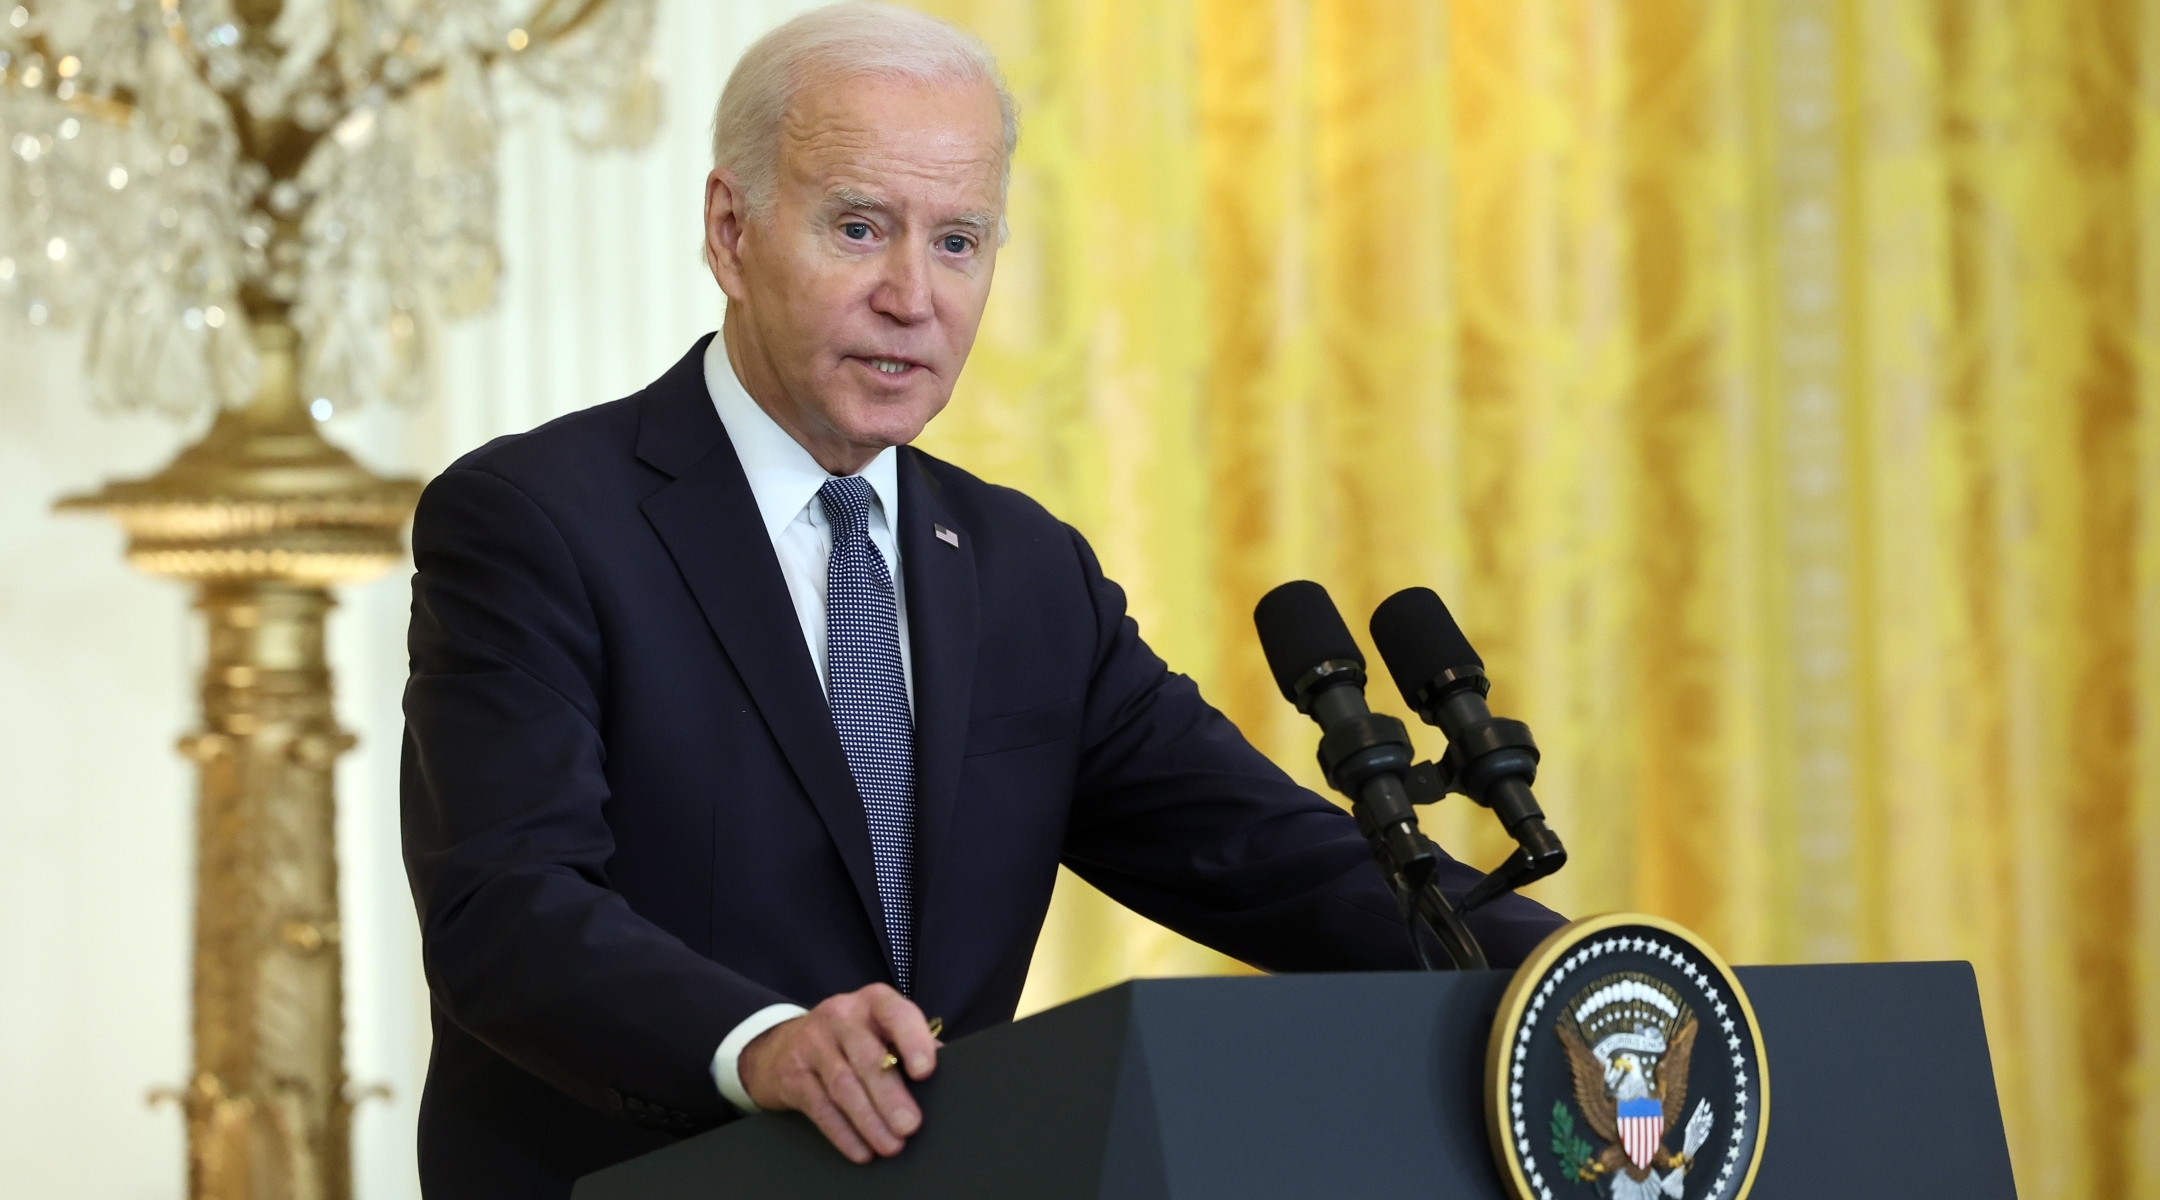 ‘Silence is complicity’: Biden calls on political leaders to denounce antisemitism, not platform it